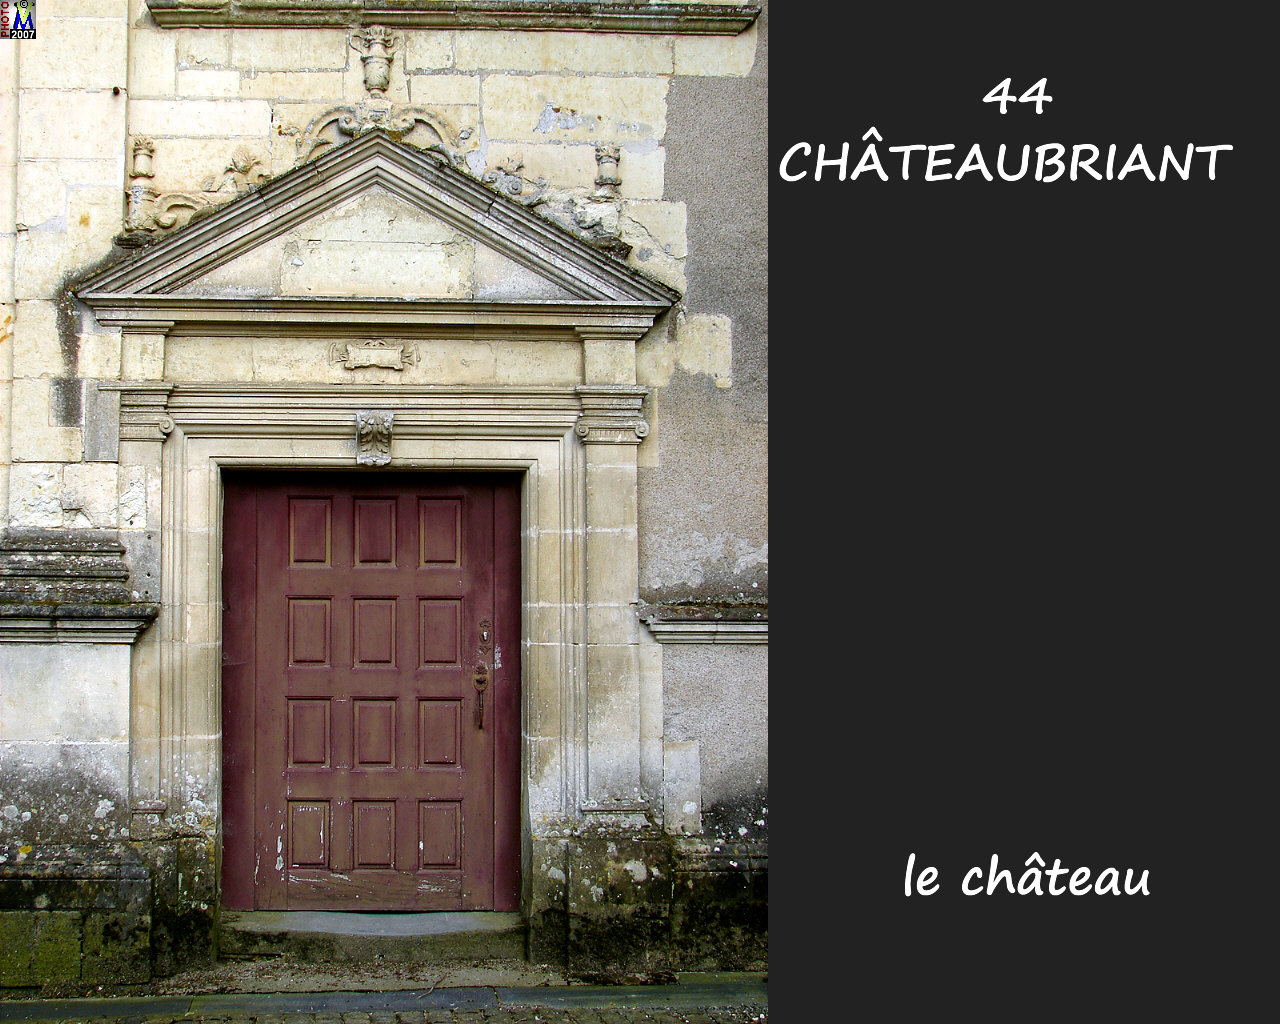 44CHATEAUBRIANT_chateau_208.jpg